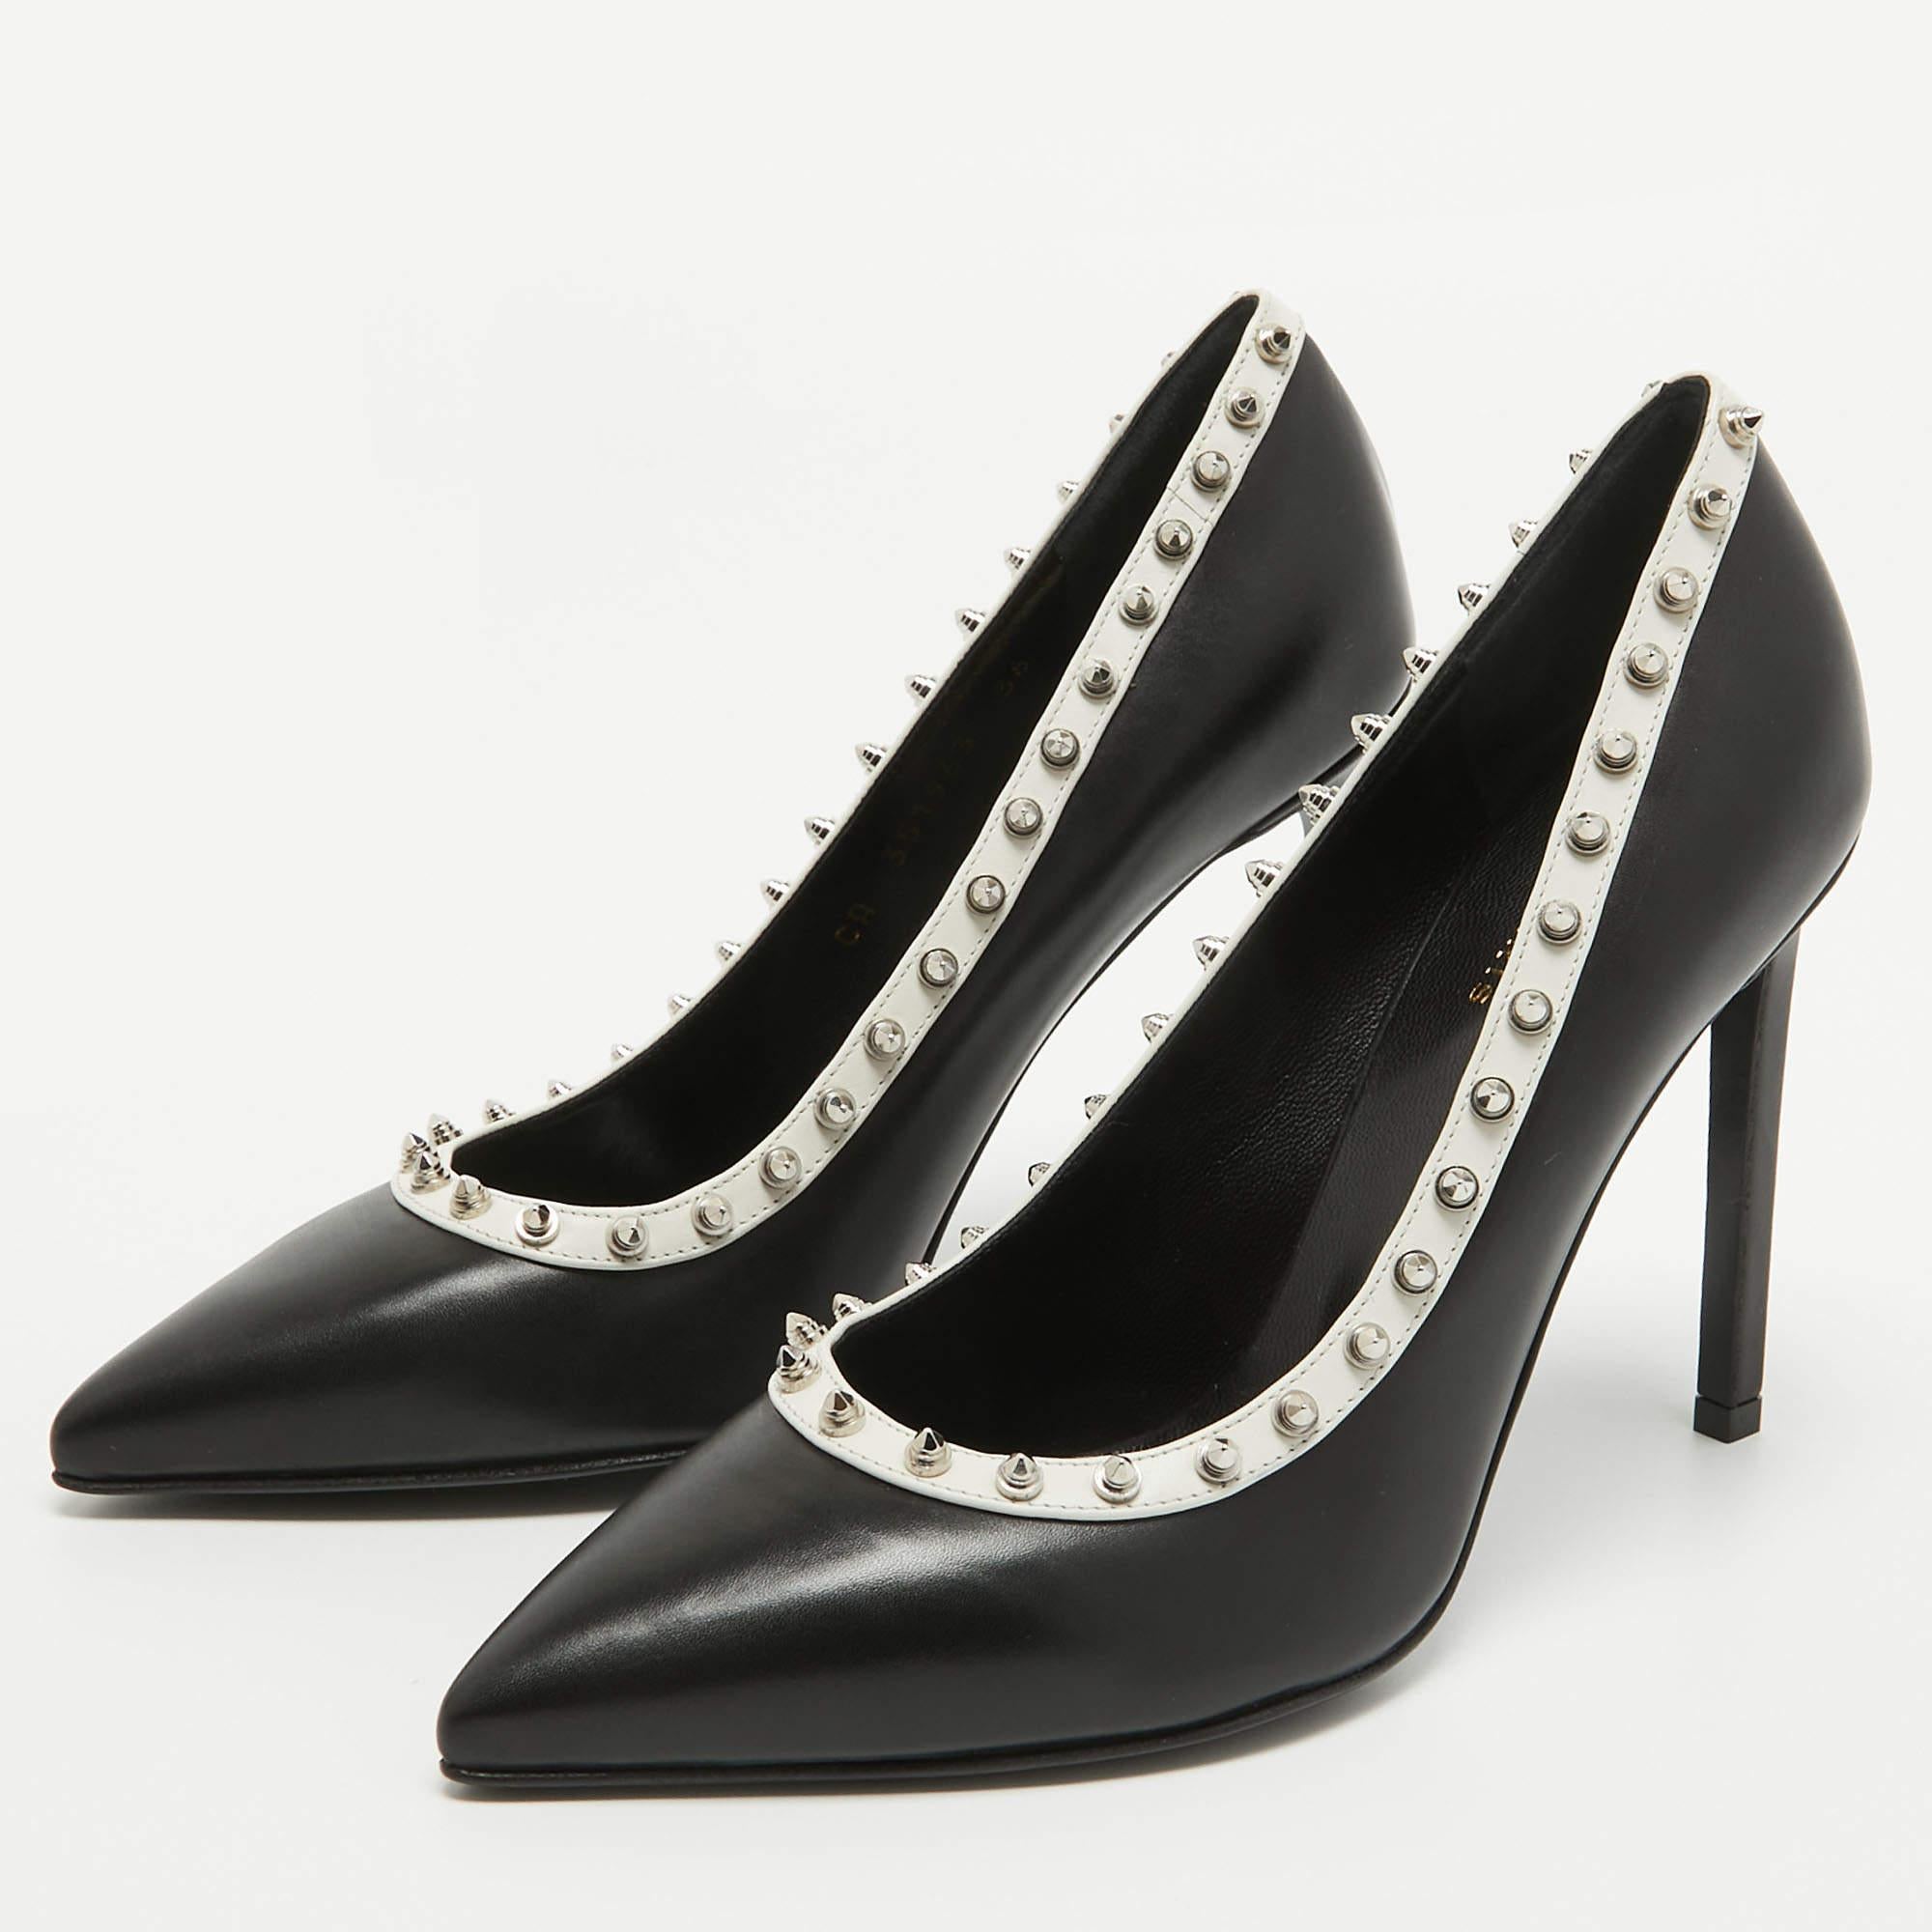 Saint Laurent Black/White Leather Studded Pointed Toe Pumps Size 36 For Sale 4